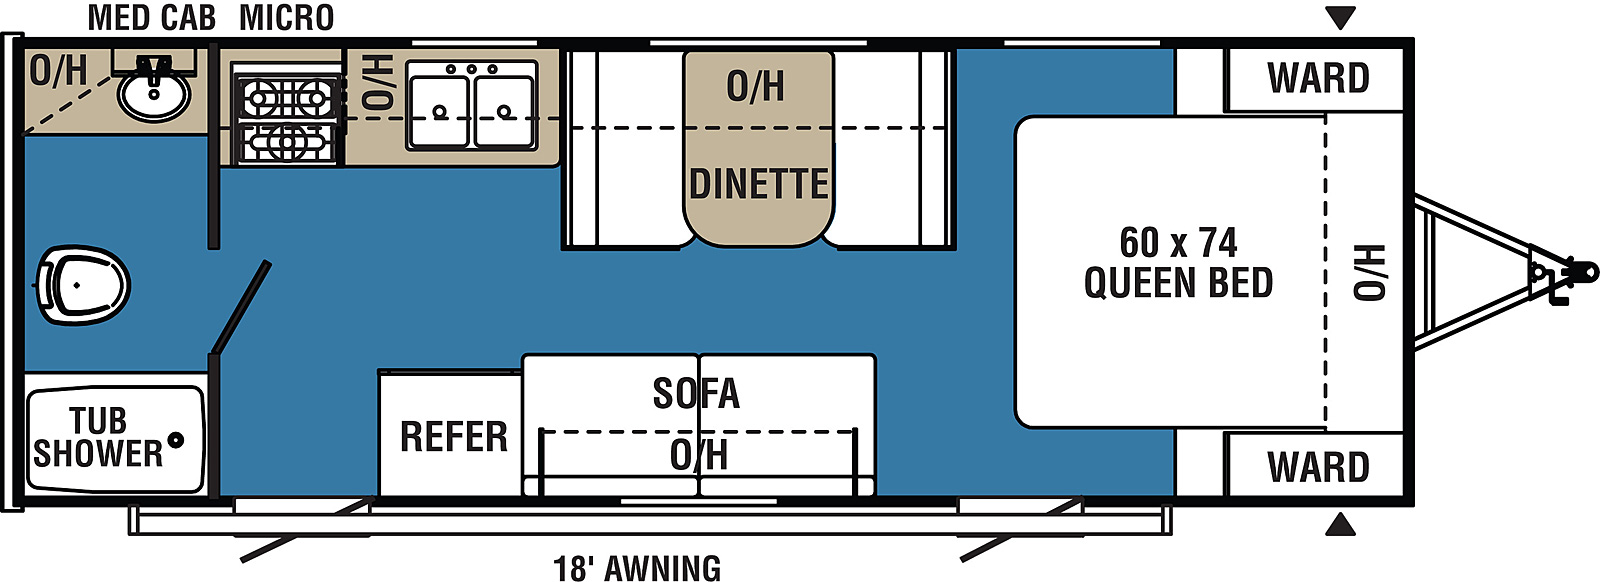 Clipper Ultra-Lite 21FQ floorplan. The 21FQ has no slide outs and two plus entry doors.